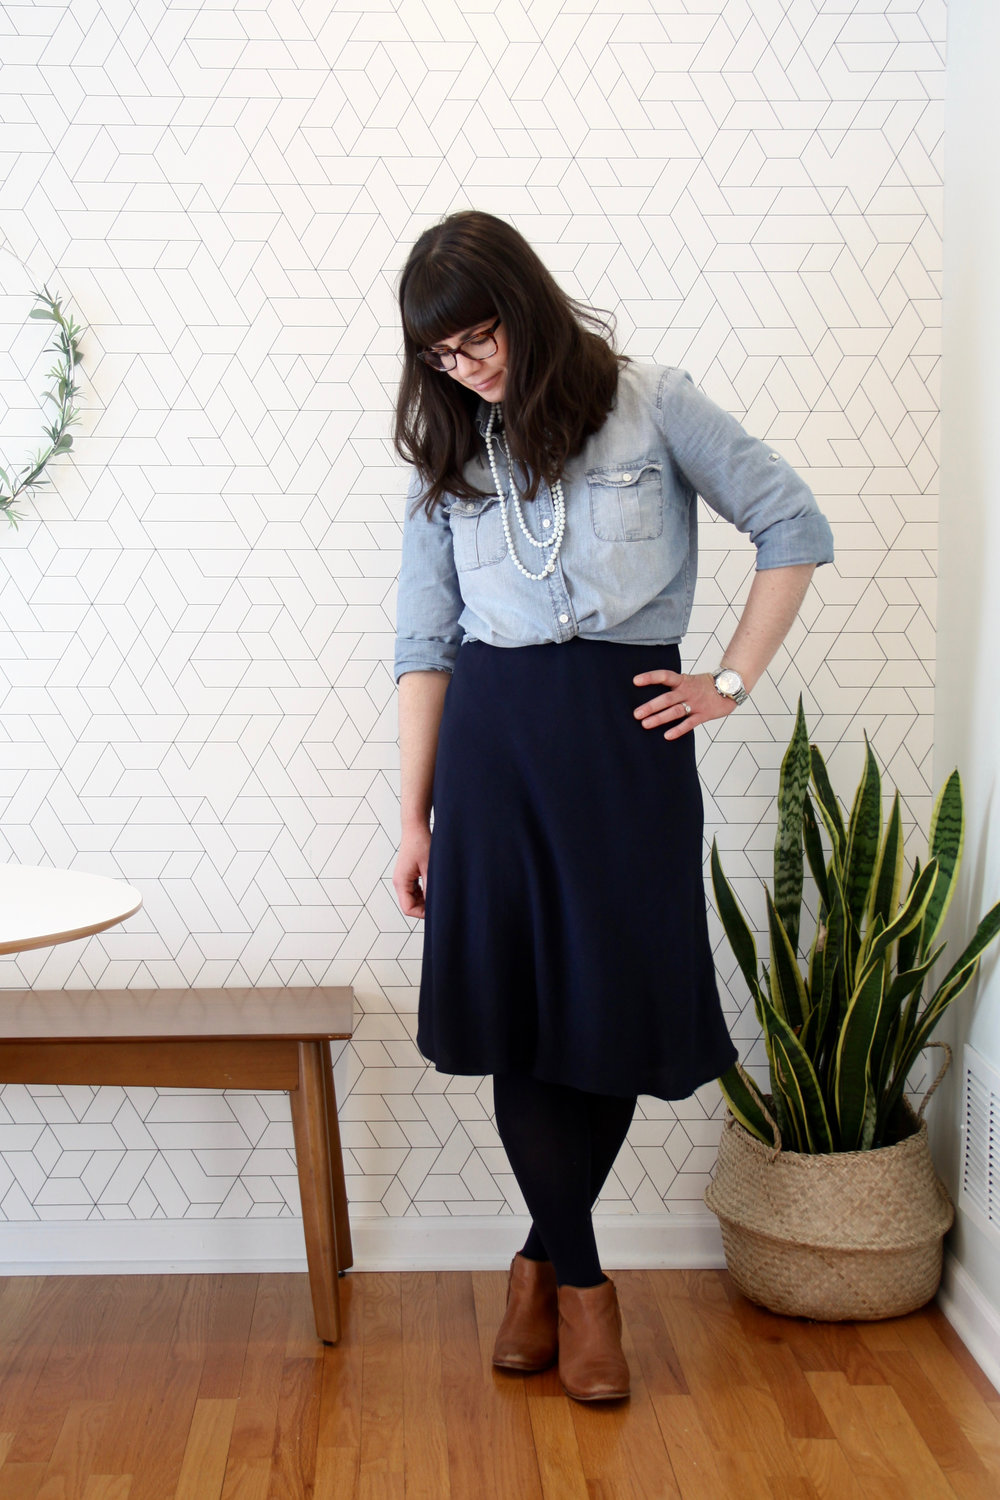 Spring 10 x 10 Navy Crepe Dress with Chambray Shirt